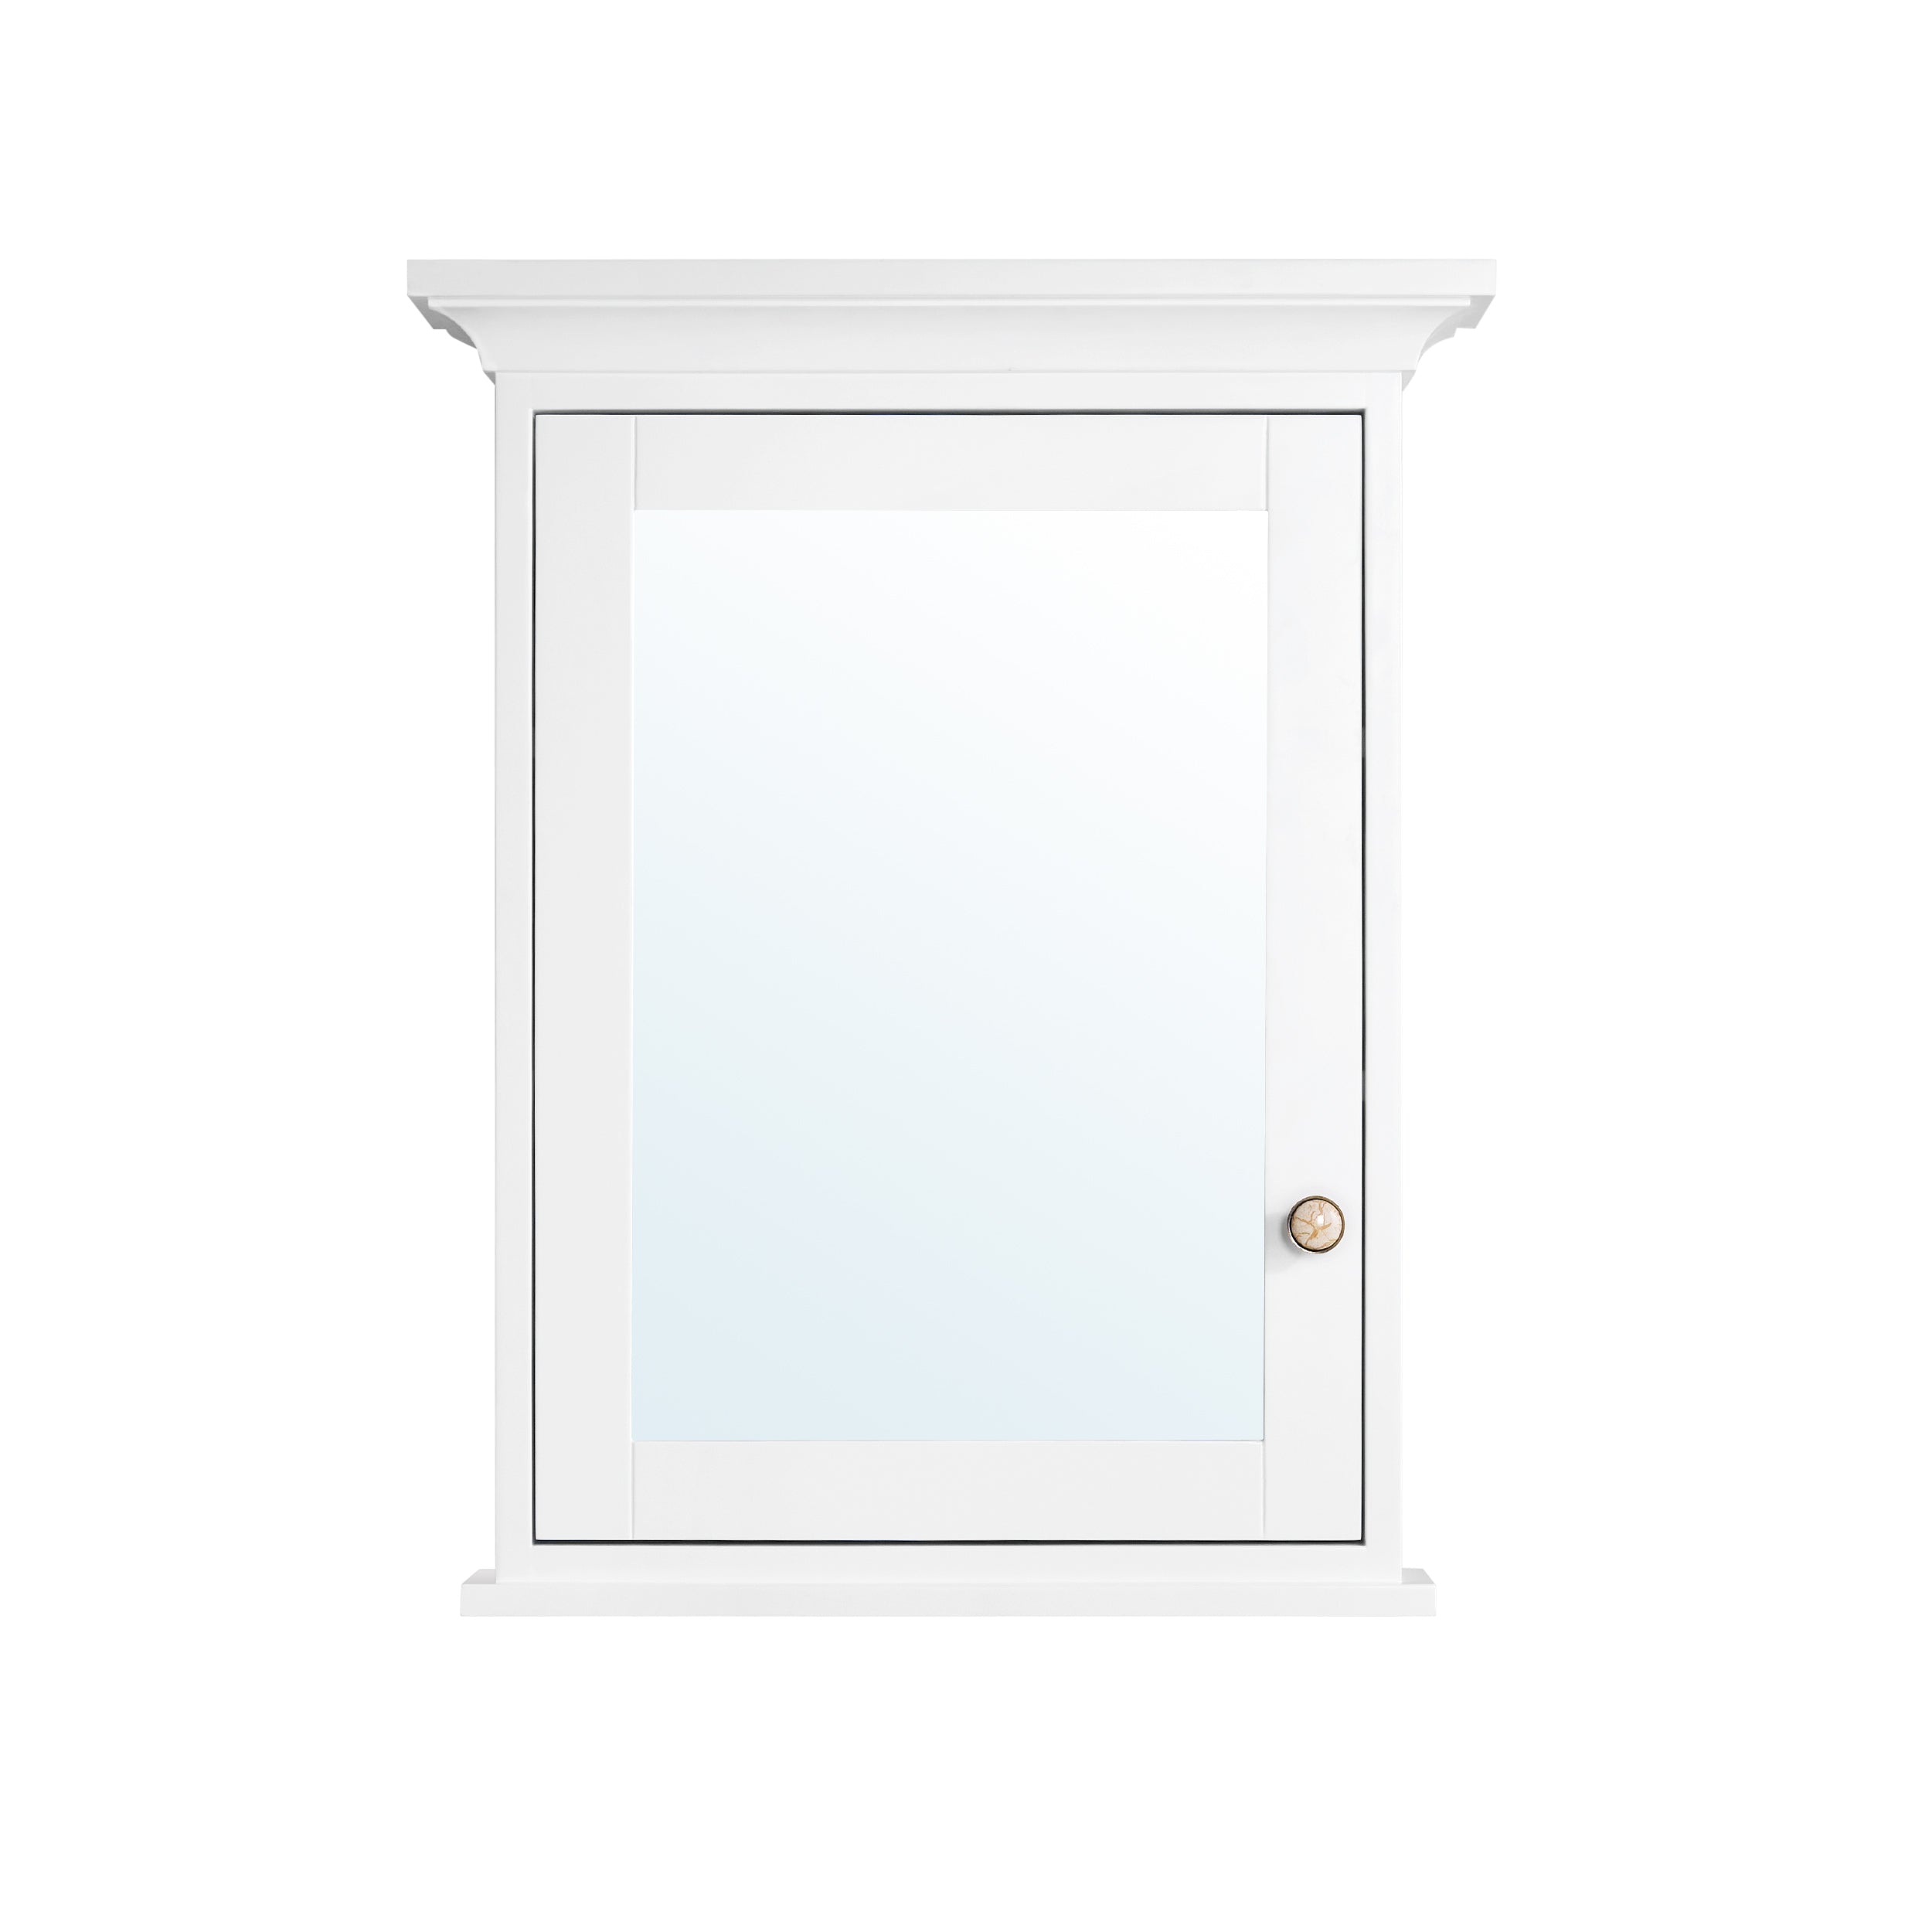 24 in.W x 30 in.H Surface-Mount Bathroom Medicine Cabinet with Mirror in White